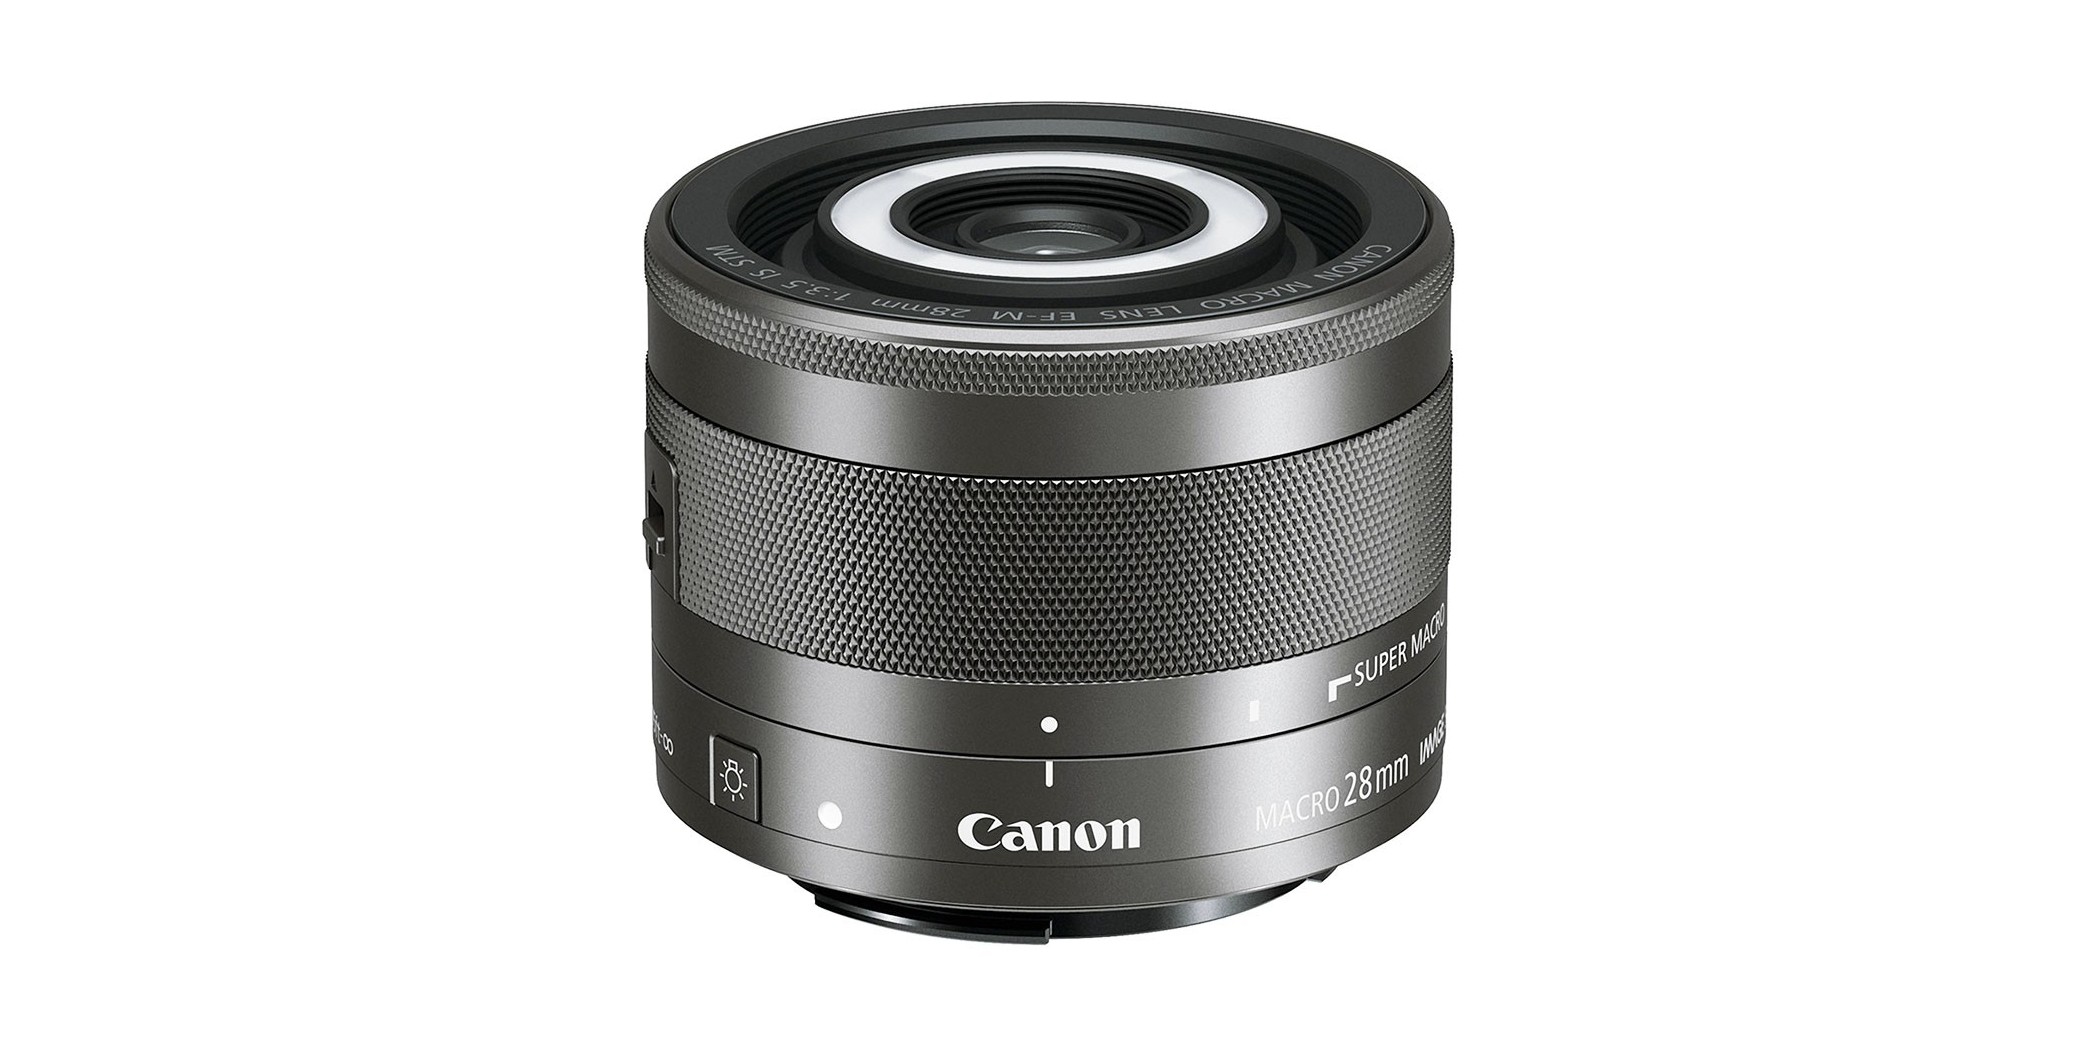 Canon EF-M 28mm f 3.5 IS STM MACRO